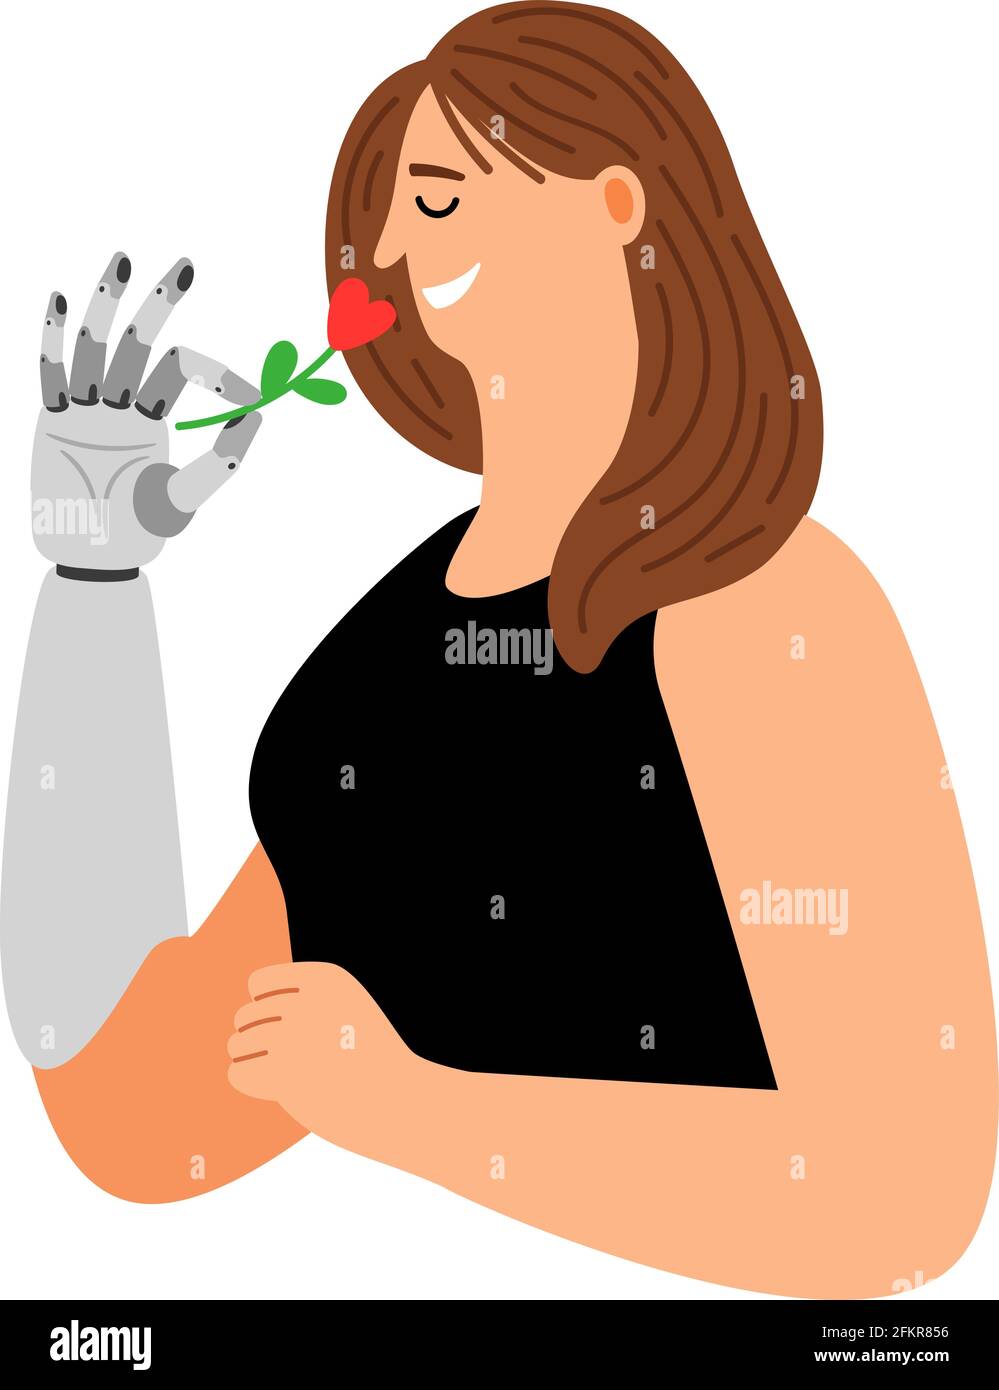 Prosthetic hand. Cartoon woman with bionic arm, metallic cybernetic hand hold flower with red heart, vector illustration creation of future technologies isolated on white background Stock Vector